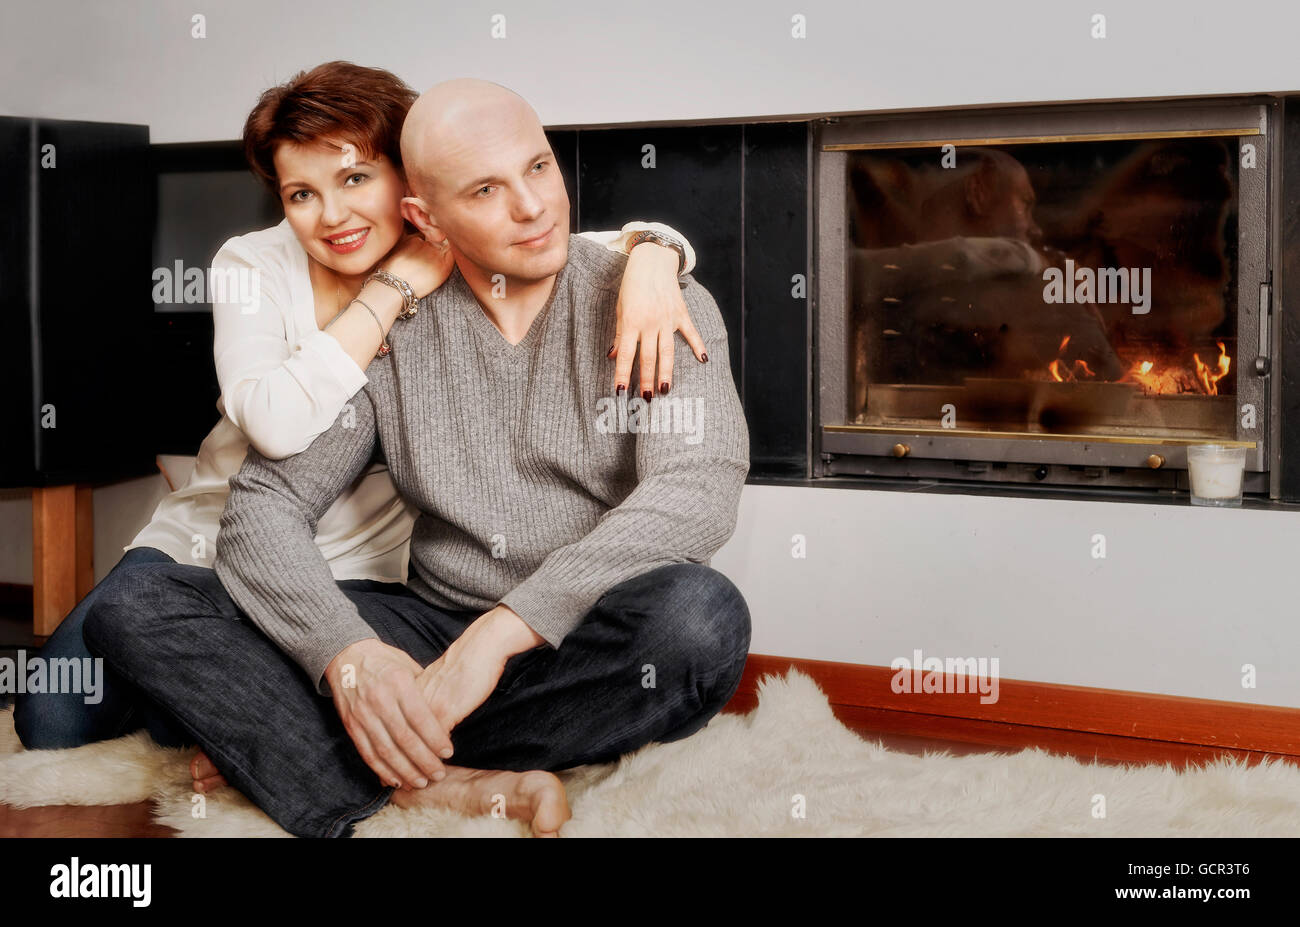 Romantic couple of brunette woman and bald headed man sitting on the fur carpet near the fireplace. Fire in the fireplace is burning. Stock Photo